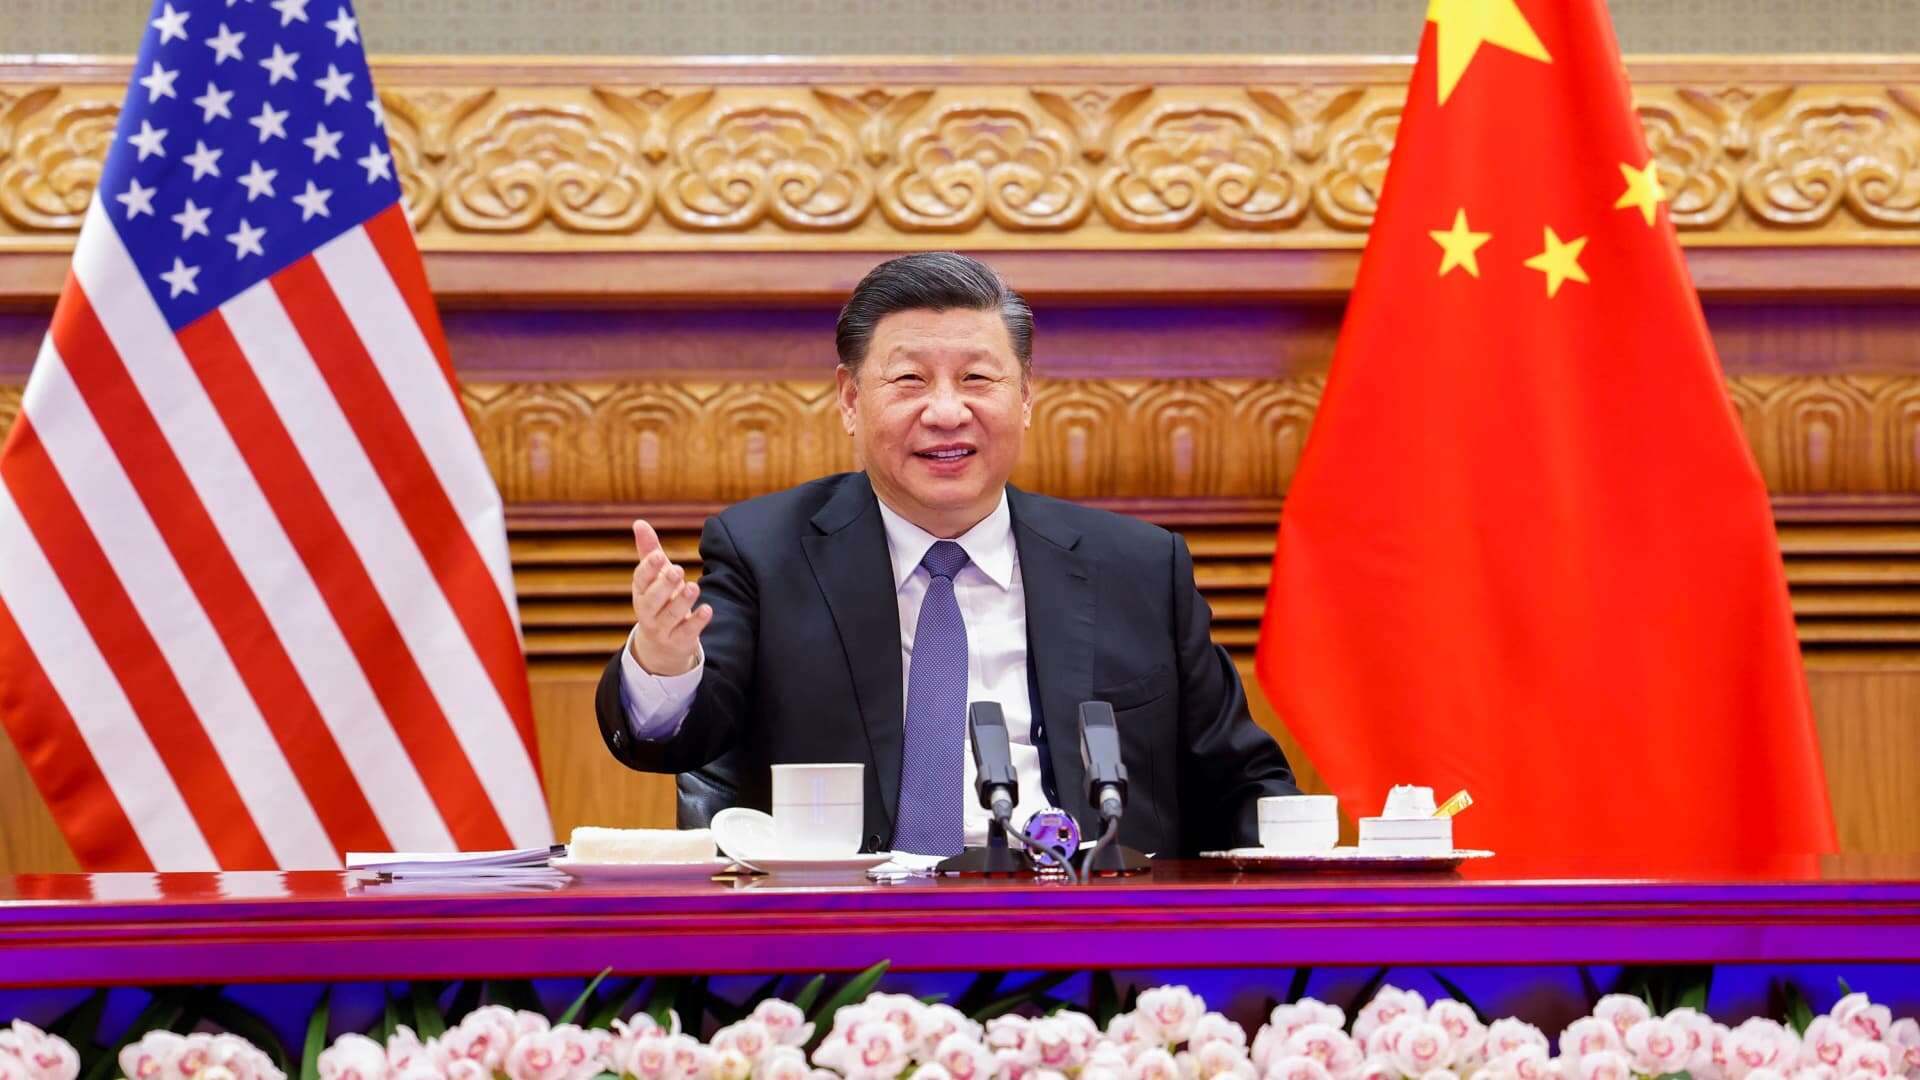 Is The Big Giant China Now Awake in Global Diplomacy?